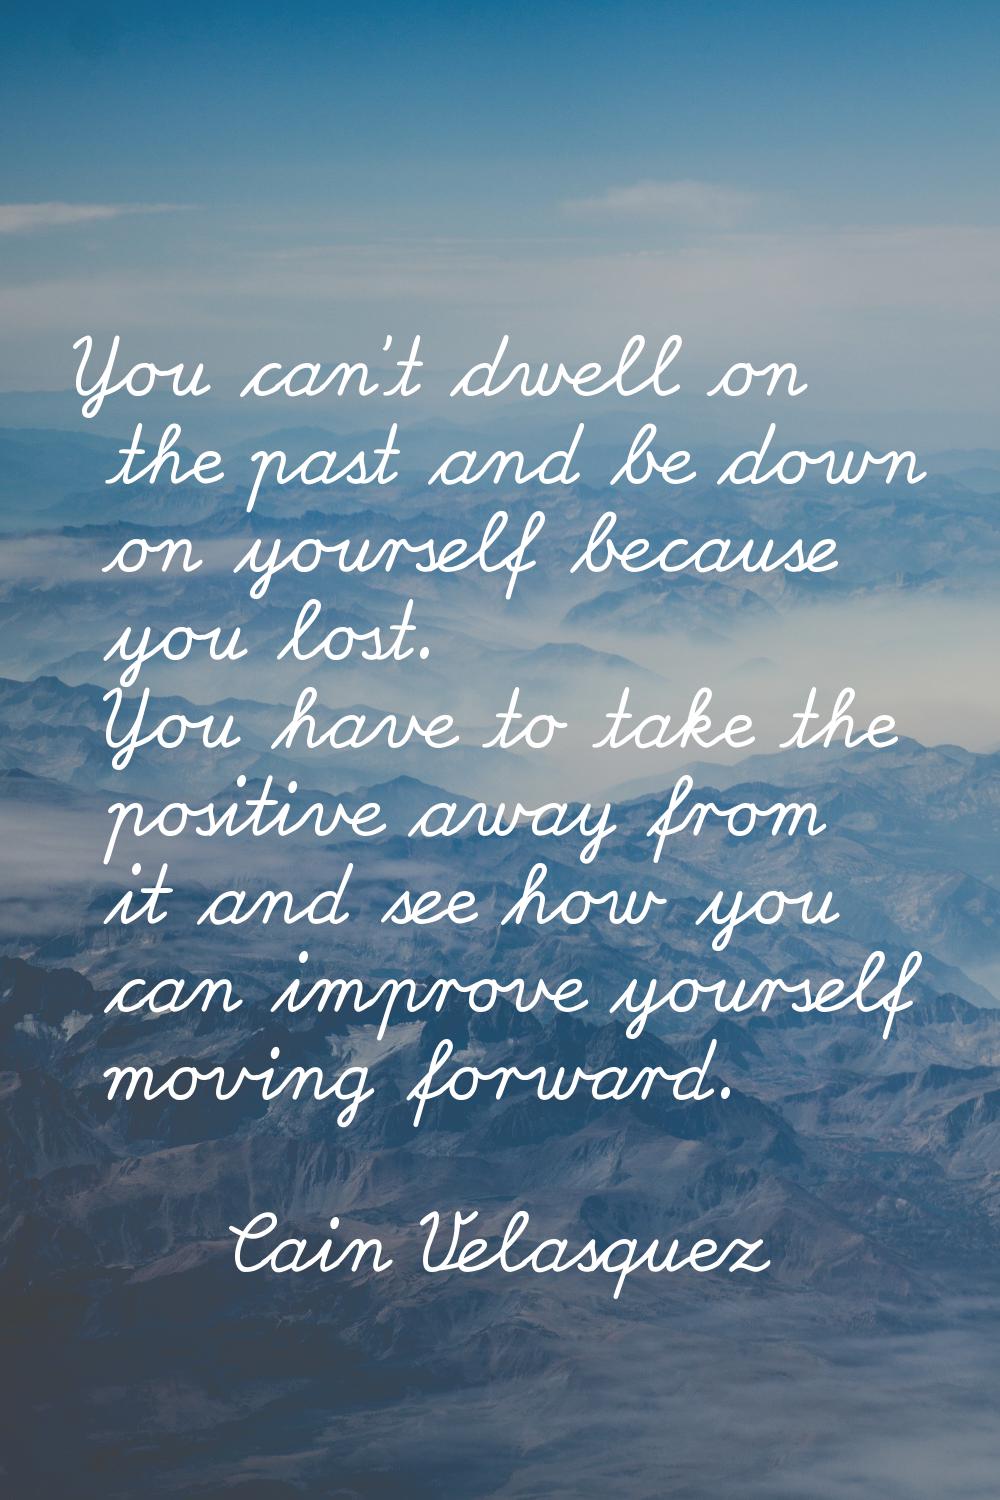 You can't dwell on the past and be down on yourself because you lost. You have to take the positive